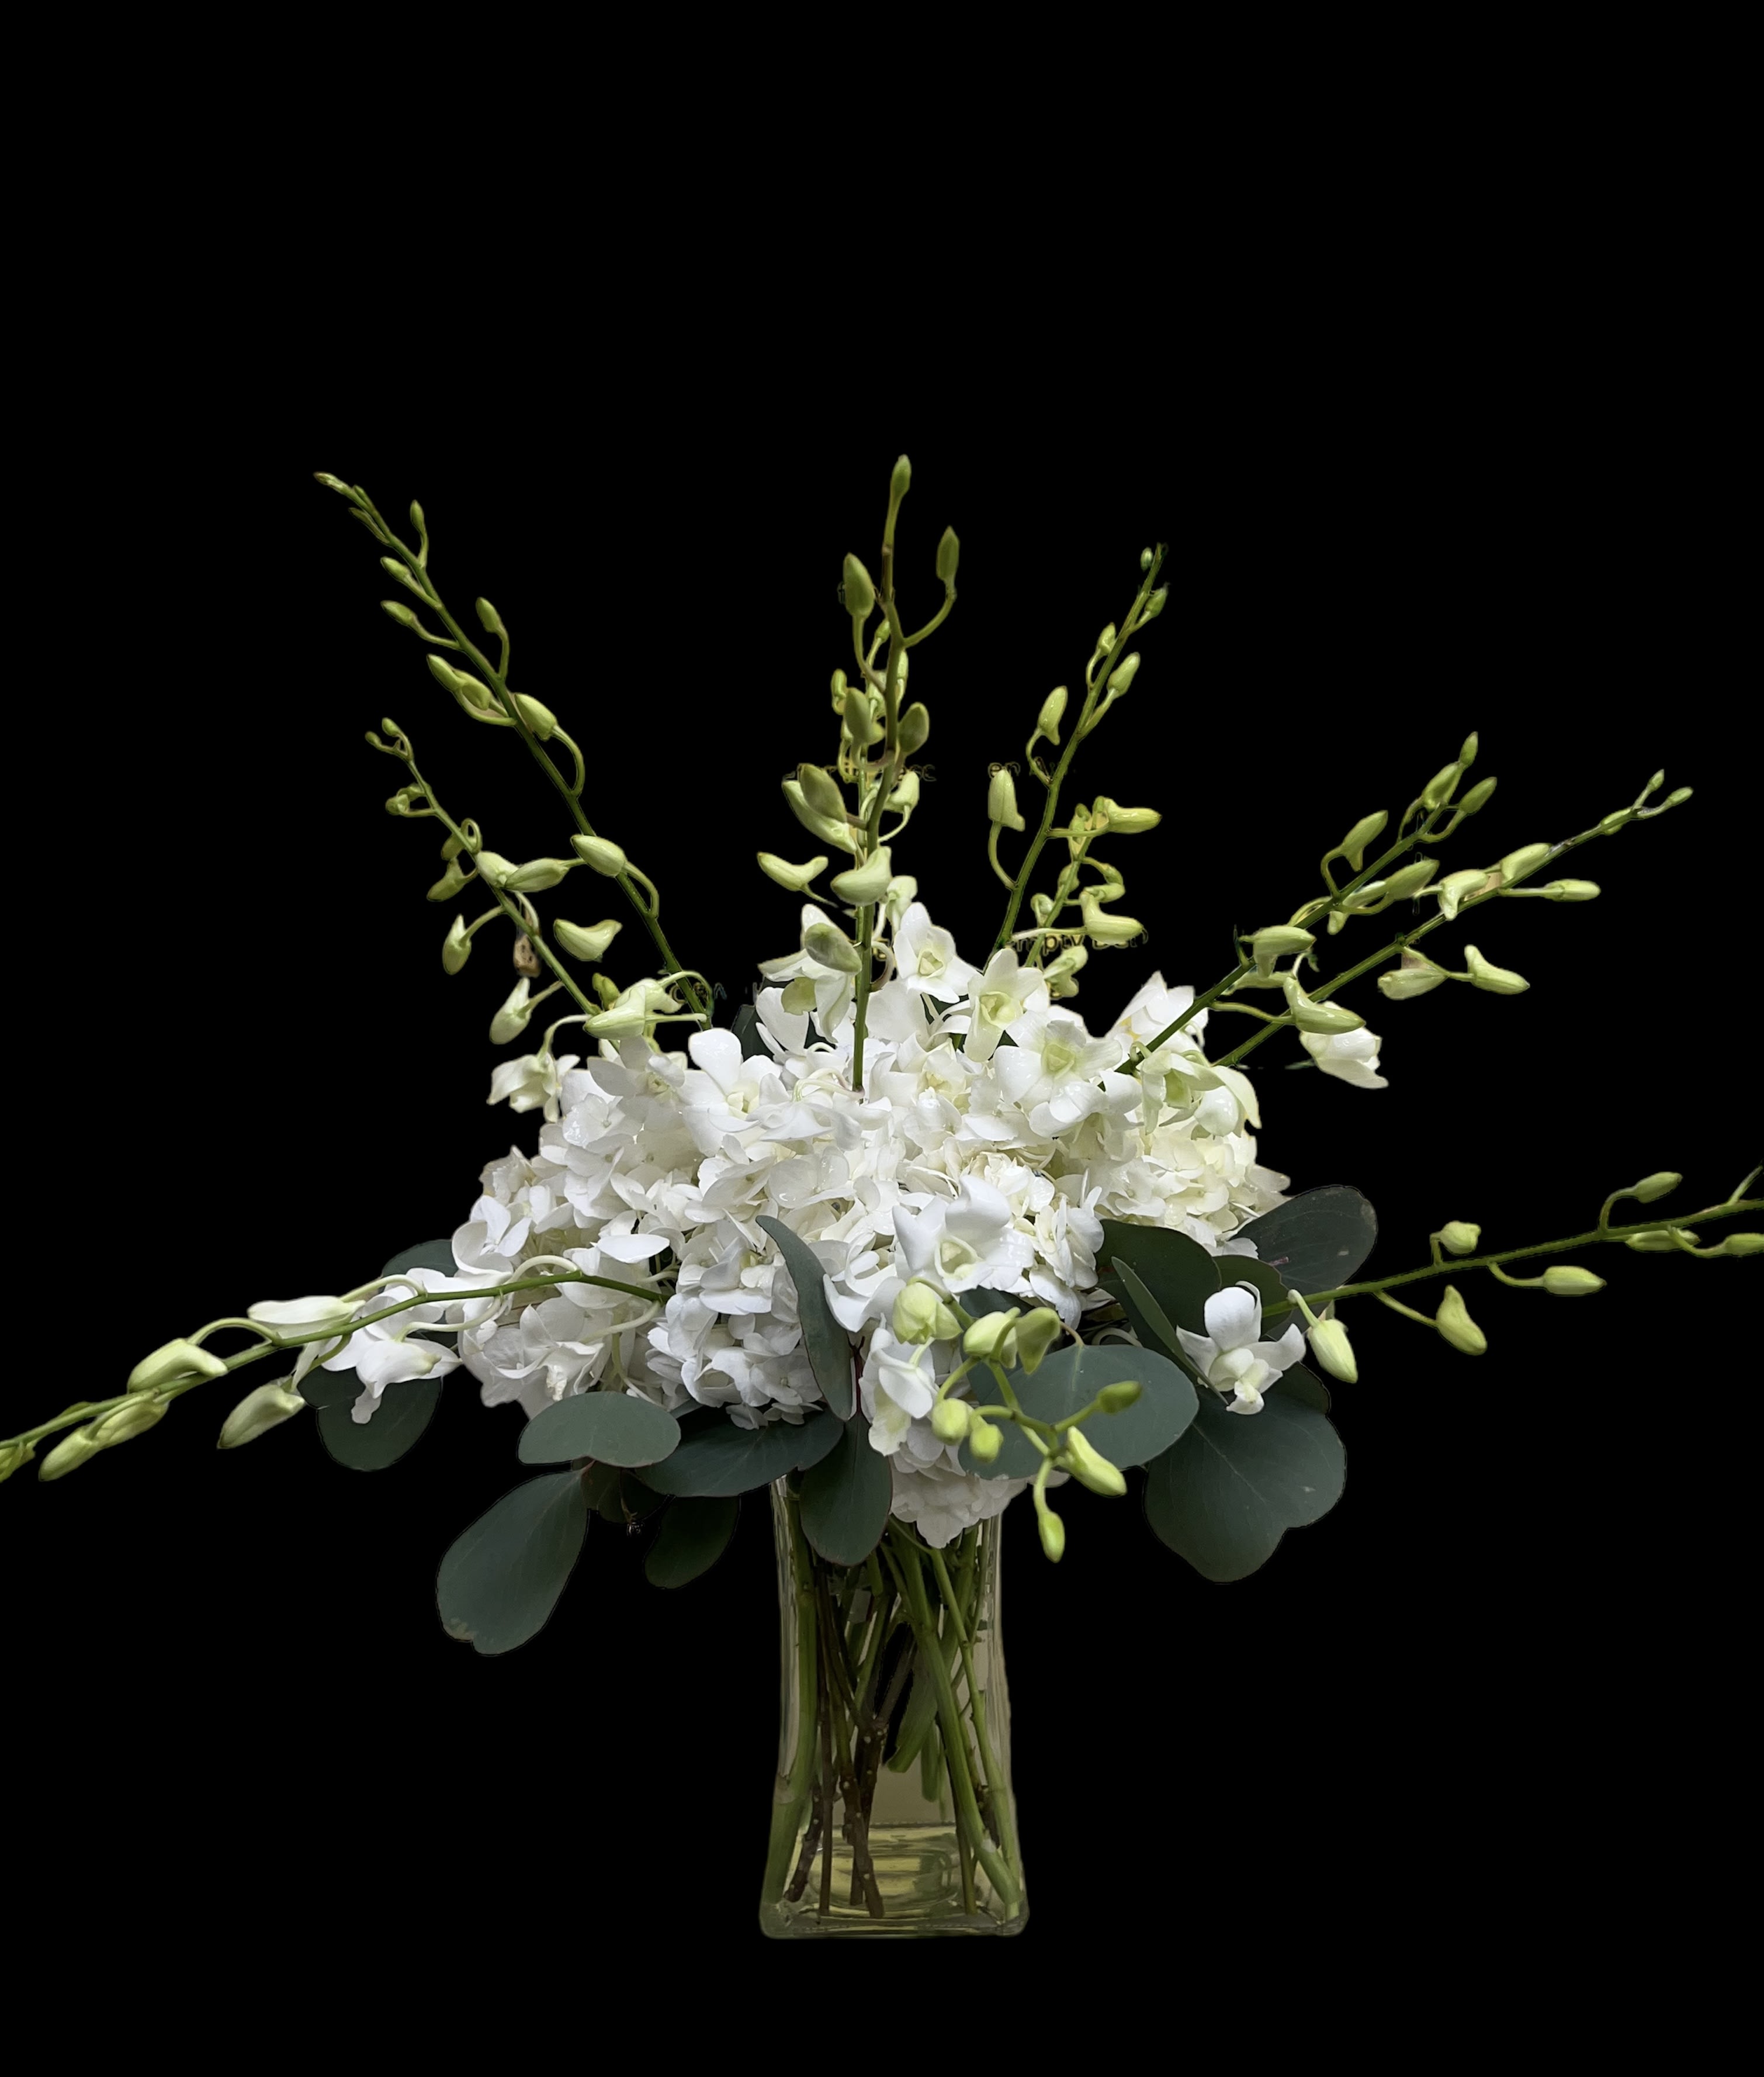 Elegant Orchids - Tall vase of white hydrangea and white dendrobium orchids. Simple yet incredibly beautiful and elegant.